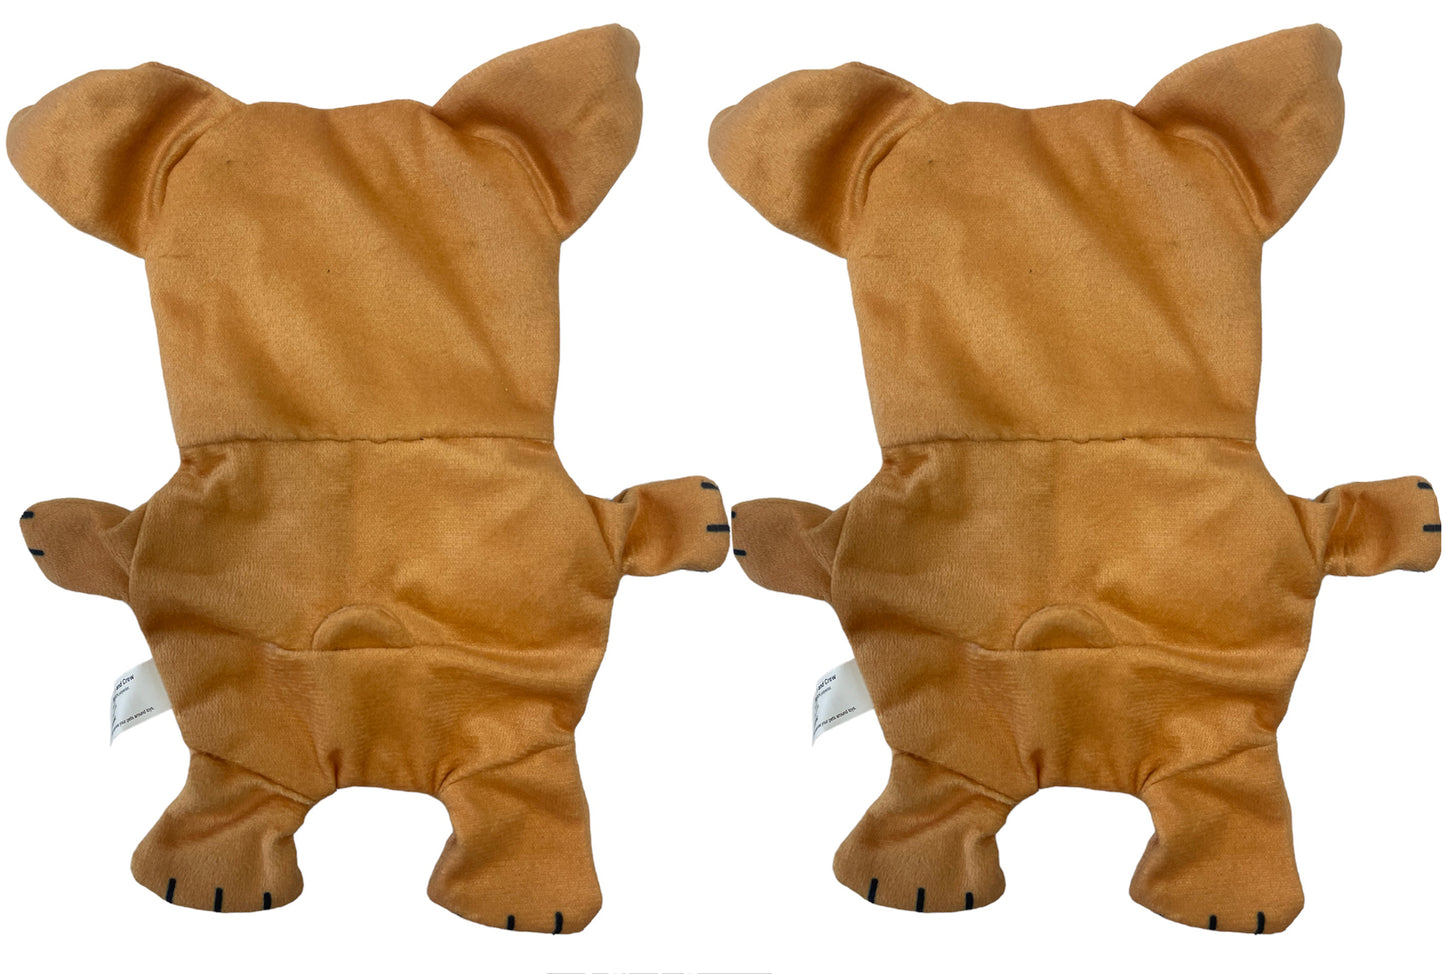 Piggy Poo and Crew Bulldog Crinkle Squeaker Toy - 2 Pack